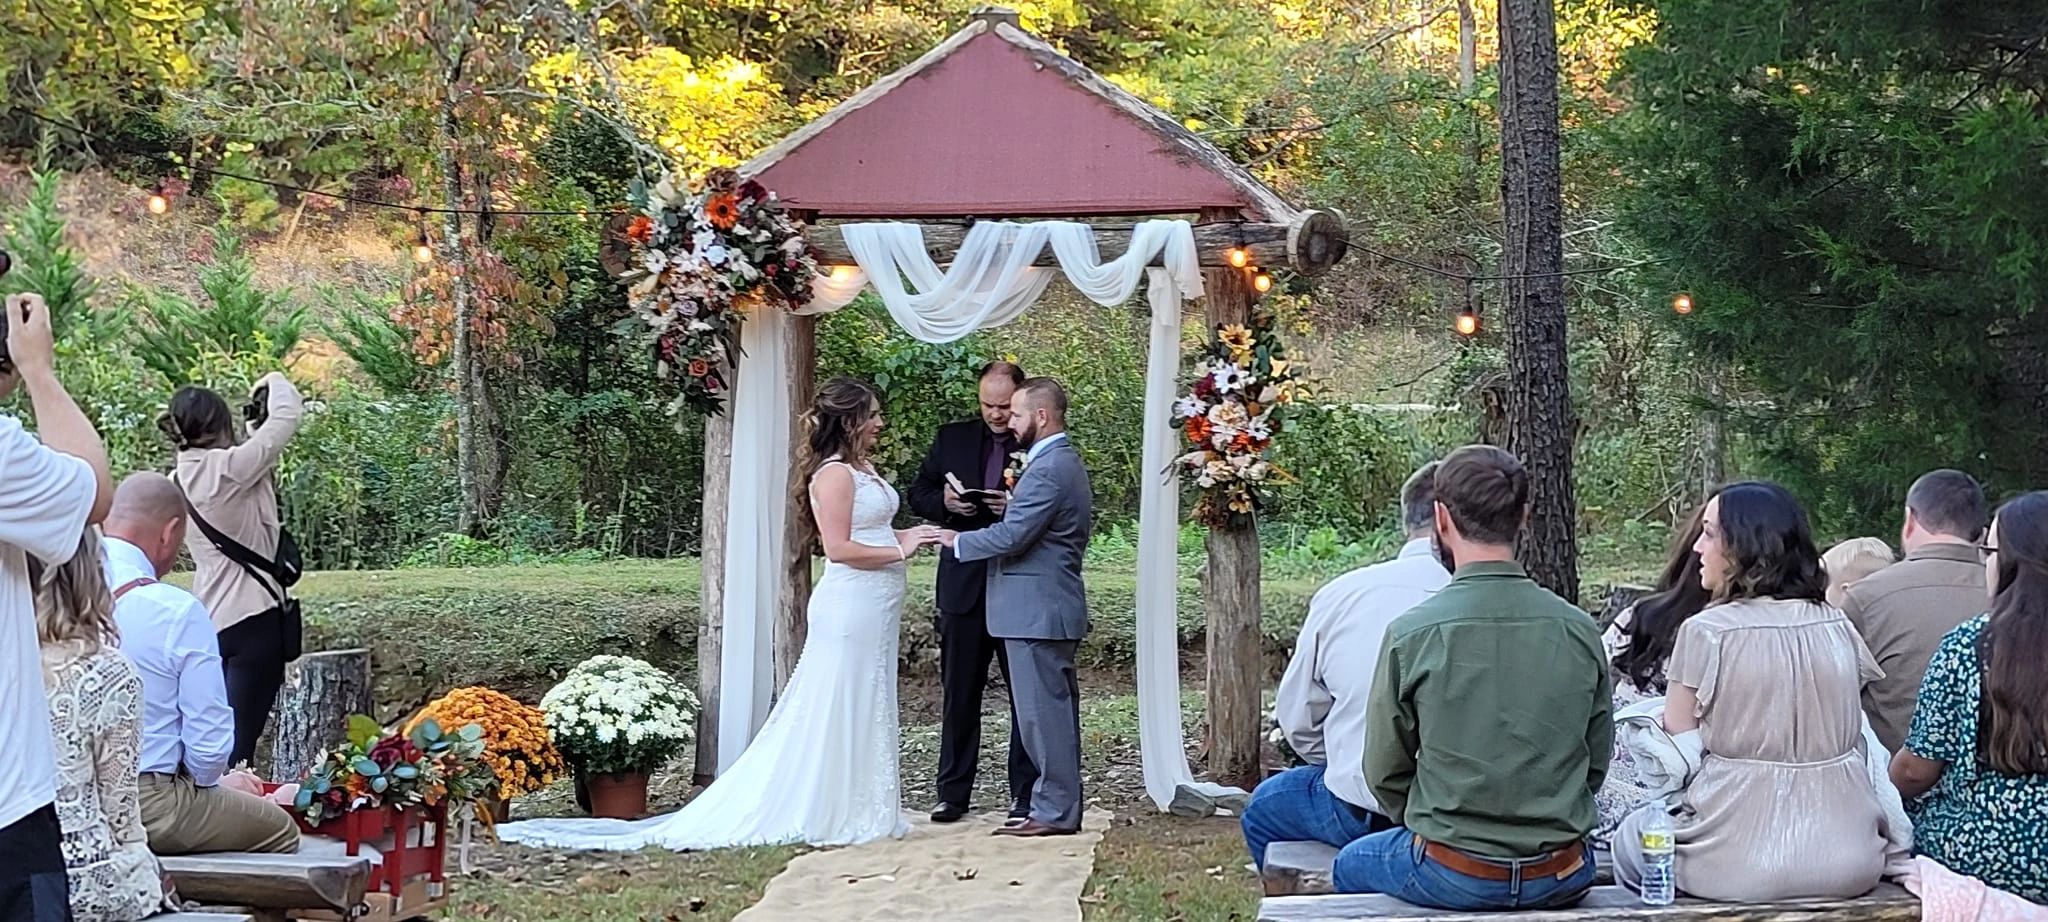 Outdoor ceremony with an indoor backup for bad weather.